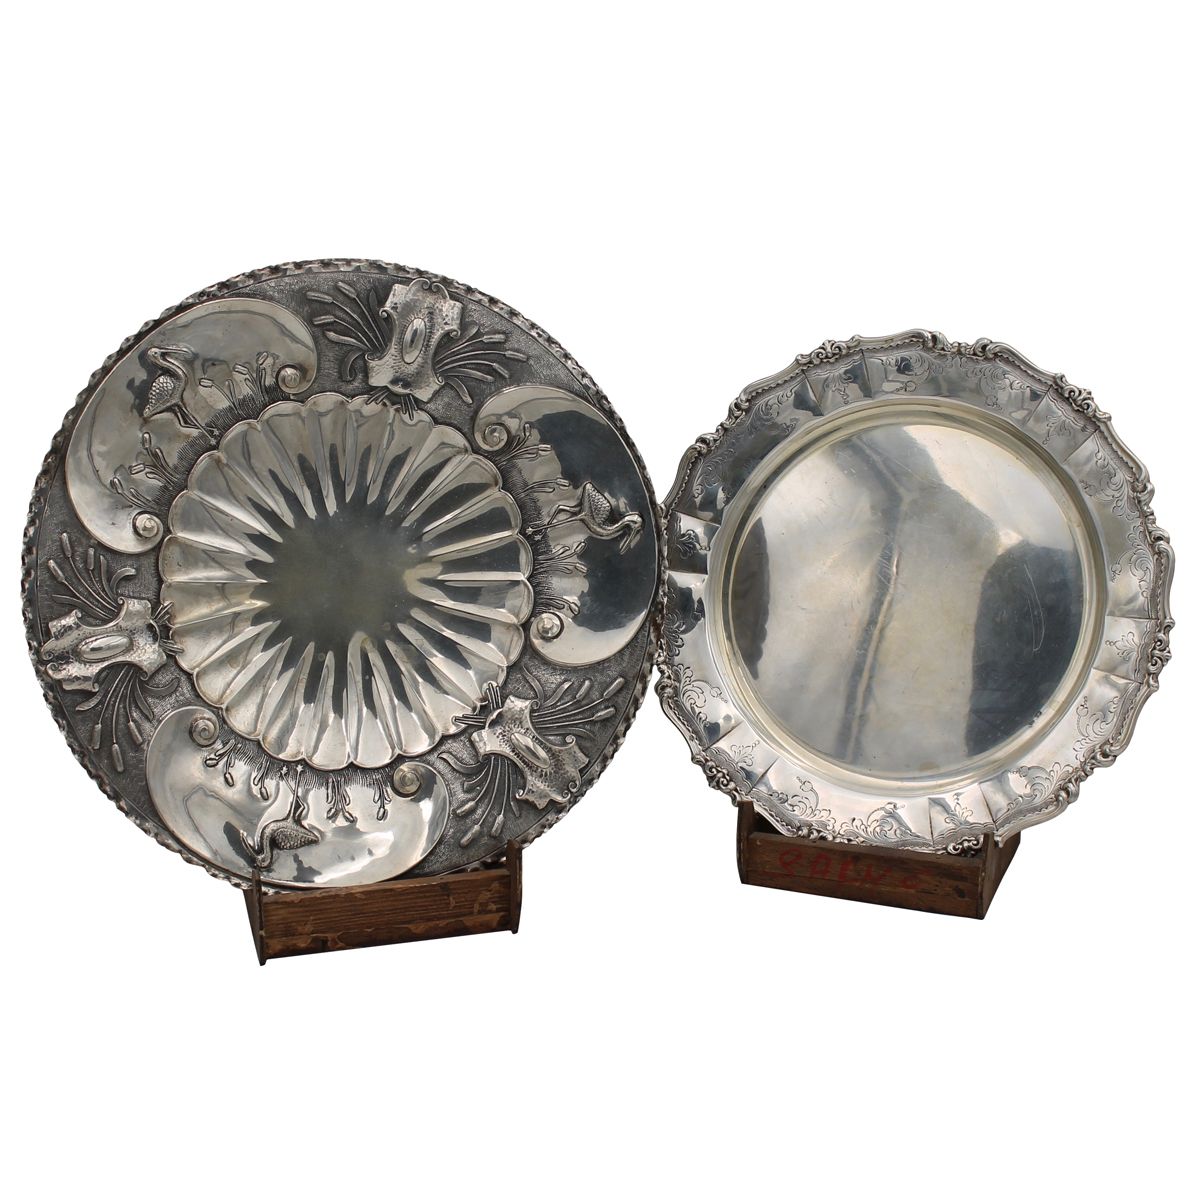 DUE PIATTI - TWO DISH Engraved and embossed silver. 20th century. Kg.1.100
Engra&hellip;